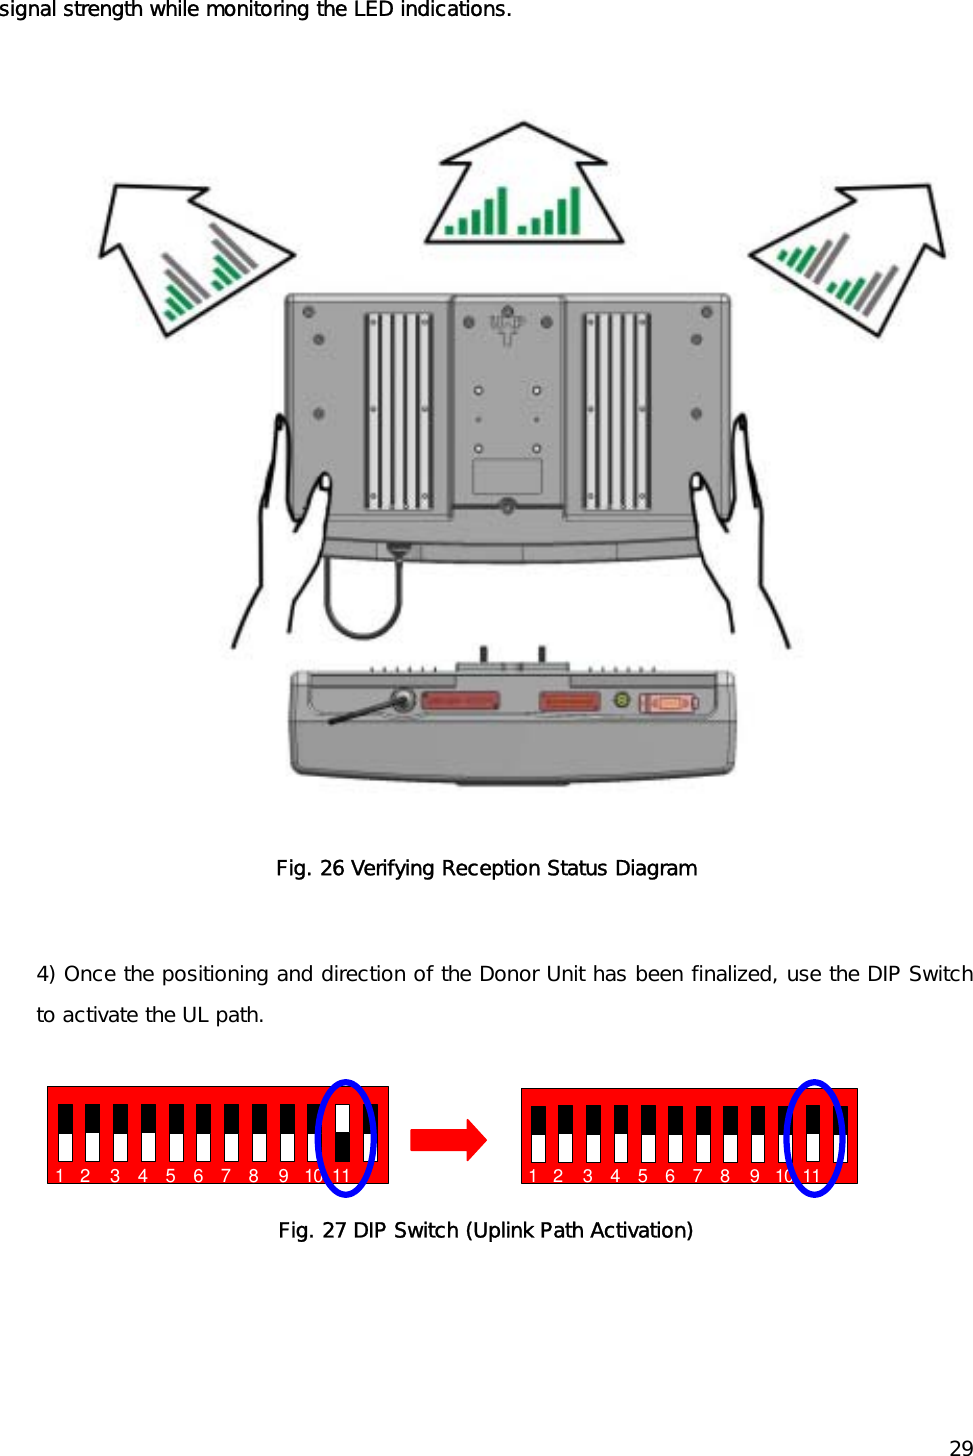    29signal strength while monitoring the LED indications.  Fig. 26 Verifying Reception Status Diagram  4) Once the positioning and direction of the Donor Unit has been finalized, use the DIP Switch to activate the UL path.  1234567891011                 1234567891011 Fig. 27 DIP Switch (Uplink Path Activation)  